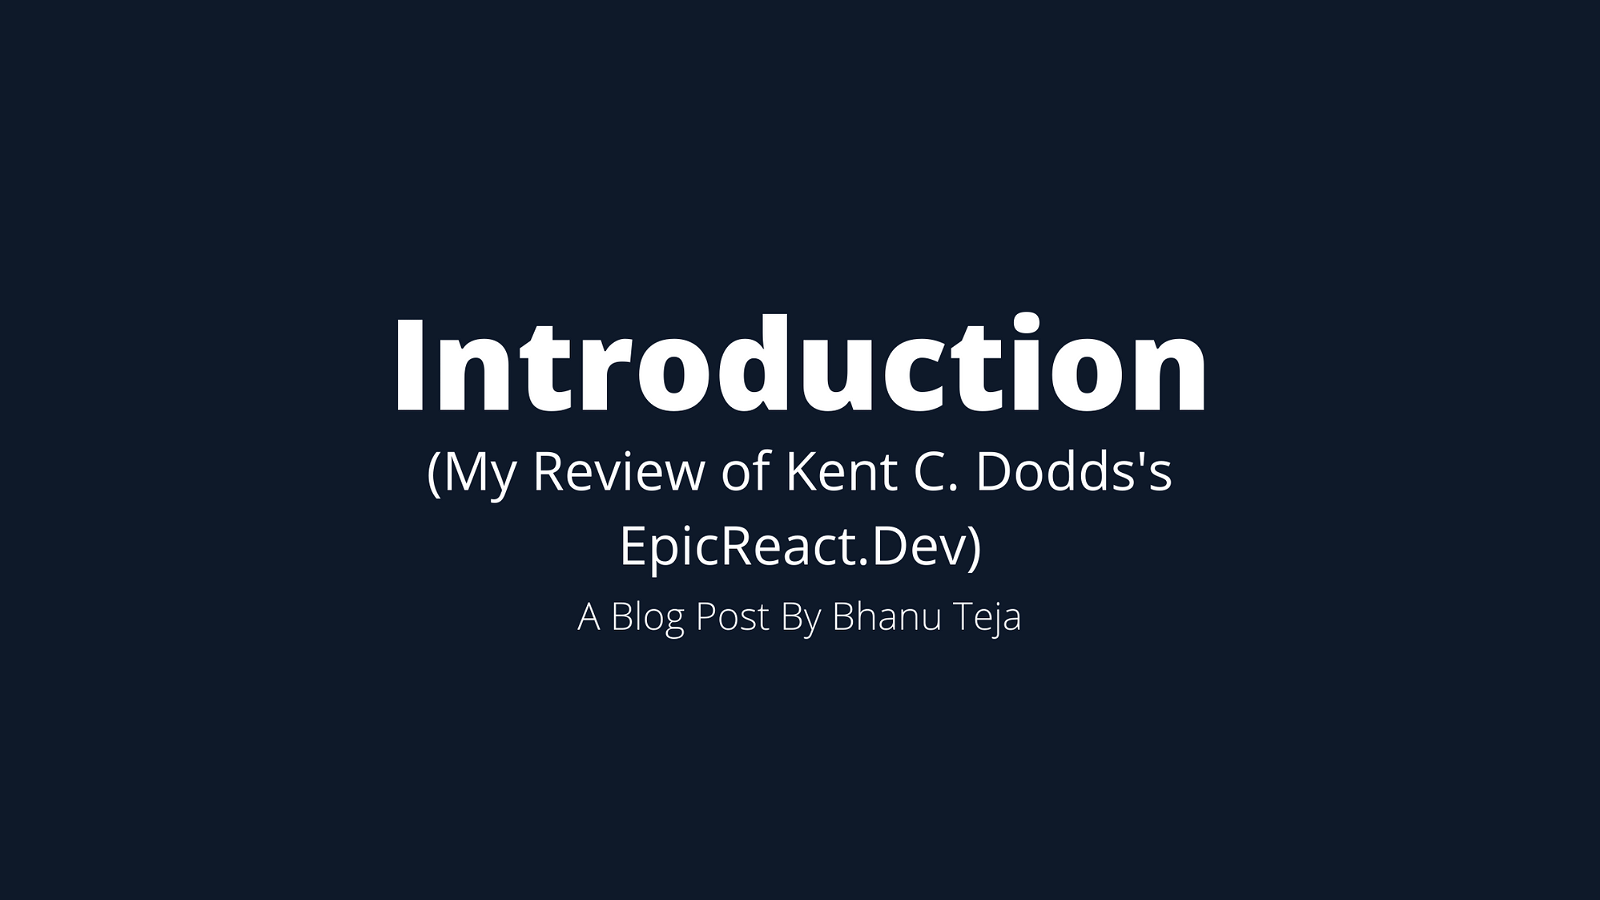 My Review of Kent C. Dodds’s EpicReact.Dev: Introduction